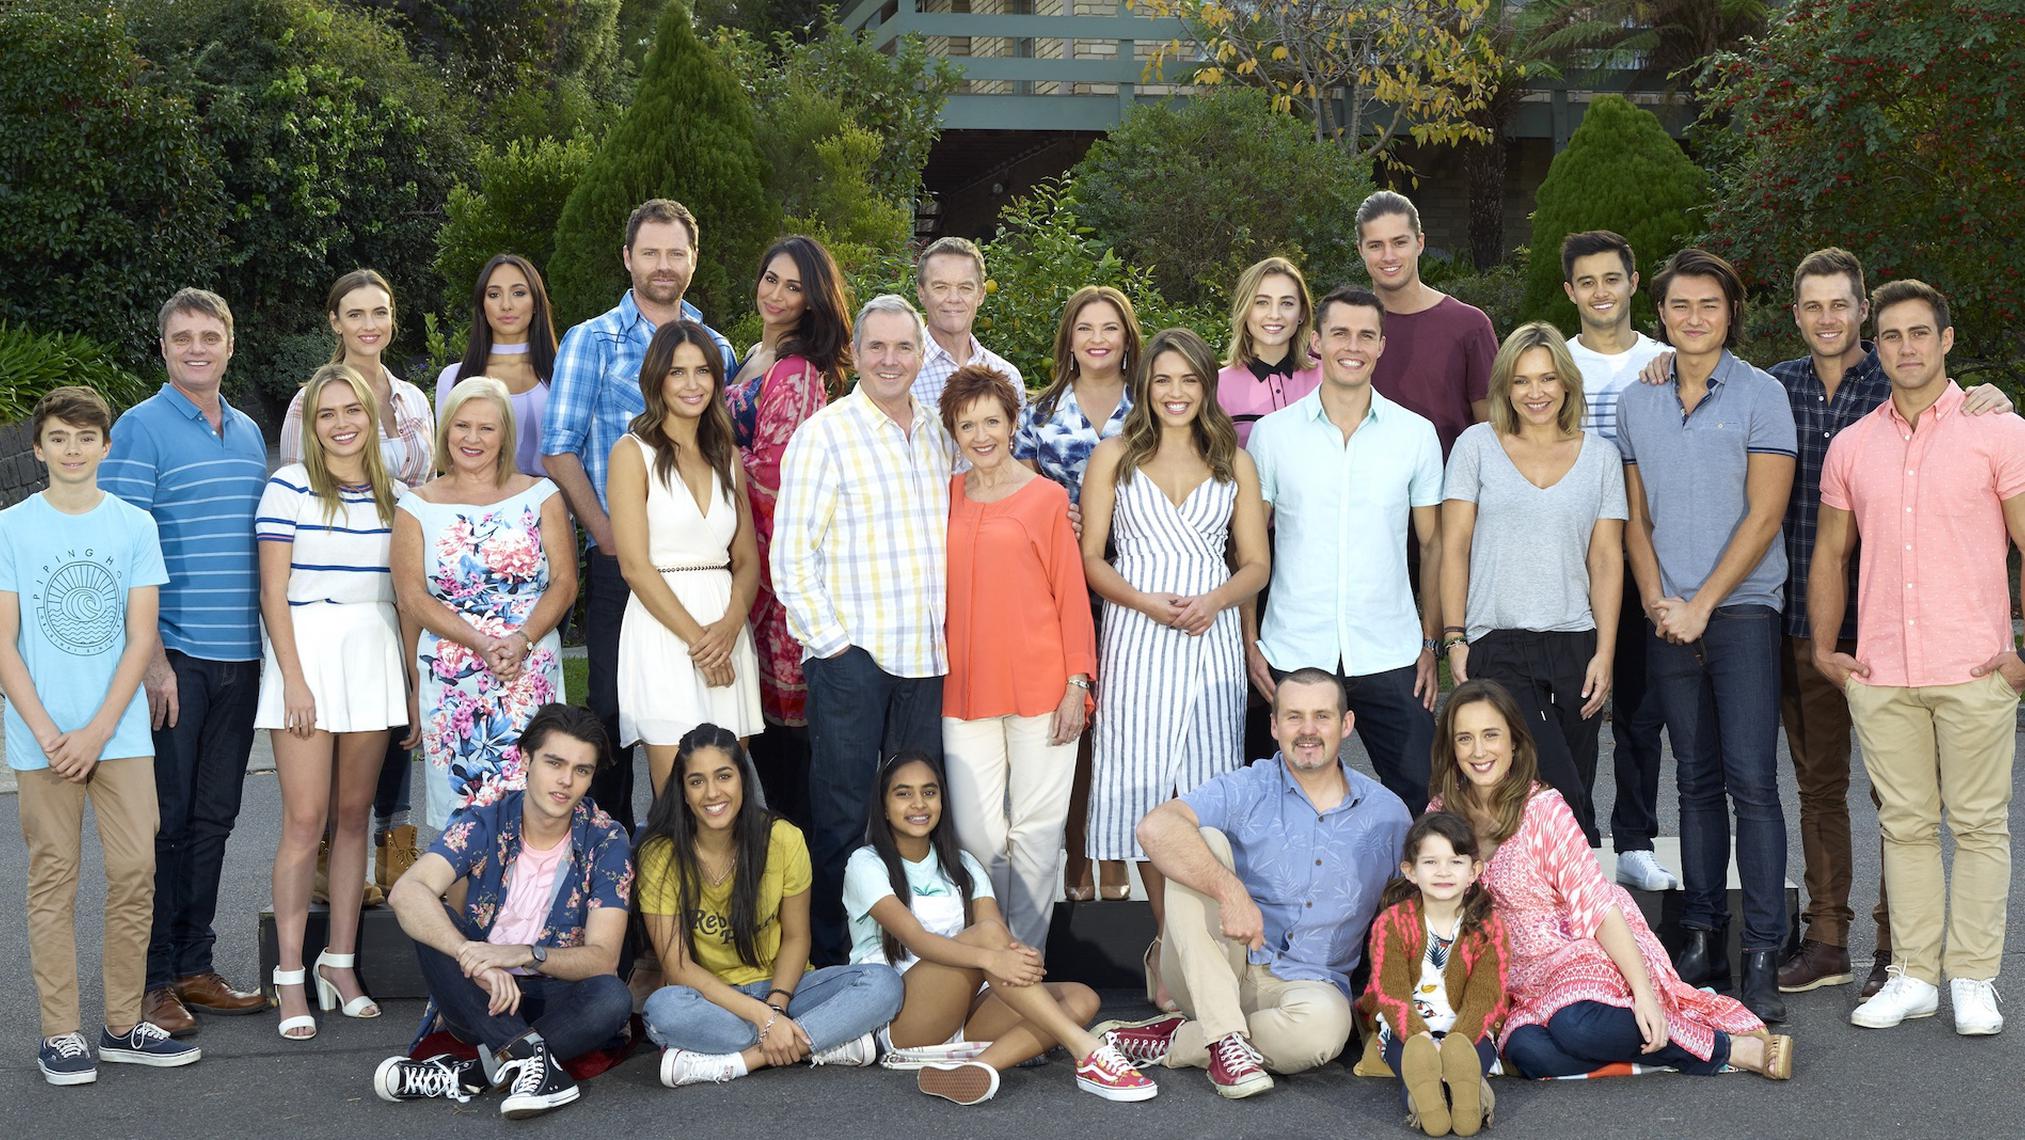 Neighbours cast - Character pictures and who plays who